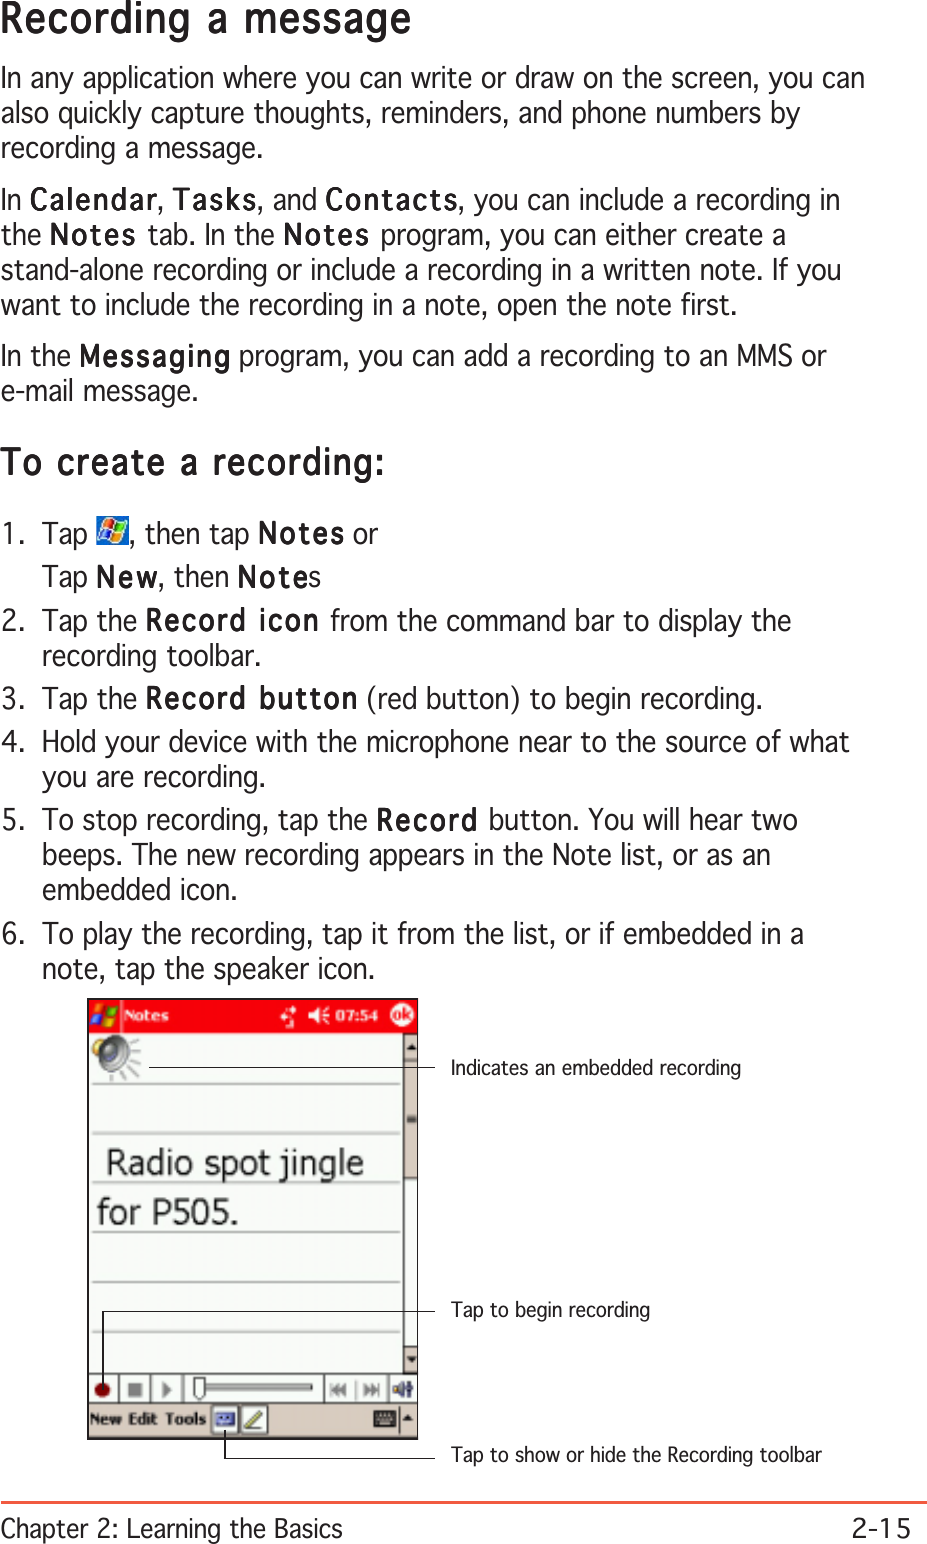 Chapter 2: Learning the Basics2-15Recording a messageRecording a messageRecording a messageRecording a messageRecording a messageIn any application where you can write or draw on the screen, you canalso quickly capture thoughts, reminders, and phone numbers byrecording a message.In CalendarCalendarCalendarCalendarCalendar, TasksTasksTasksTasksTasks, and ContactsContactsContactsContactsContacts, you can include a recording inthe NotesNotesNotesNotesNot es tab. In the NotesNotesNotesNotesNot es program, you can either create astand-alone recording or include a recording in a written note. If youwant to include the recording in a note, open the note first.In the MessagingMessagingMessagingMessagingMessaging program, you can add a recording to an MMS ore-mail message.To create a recording:To create a recording:To create a recording:To create a recording:To create a recording:1. Tap  , then tap NotesNotesNotesNotesNotes orTap NewNewNewNewNew, then NoteNoteNoteNoteNotes2. Tap the Record icon Record icon Record icon Record icon Record icon from the command bar to display therecording toolbar.3. Tap the Record buttonRecord buttonRecord buttonRecord buttonRecord button (red button) to begin recording.4. Hold your device with the microphone near to the source of whatyou are recording.5. To stop recording, tap the RecordRecordRecordRecordRec ord  button. You will hear twobeeps. The new recording appears in the Note list, or as anembedded icon.6. To play the recording, tap it from the list, or if embedded in anote, tap the speaker icon.Indicates an embedded recordingTap to show or hide the Recording toolbarTap to begin recording